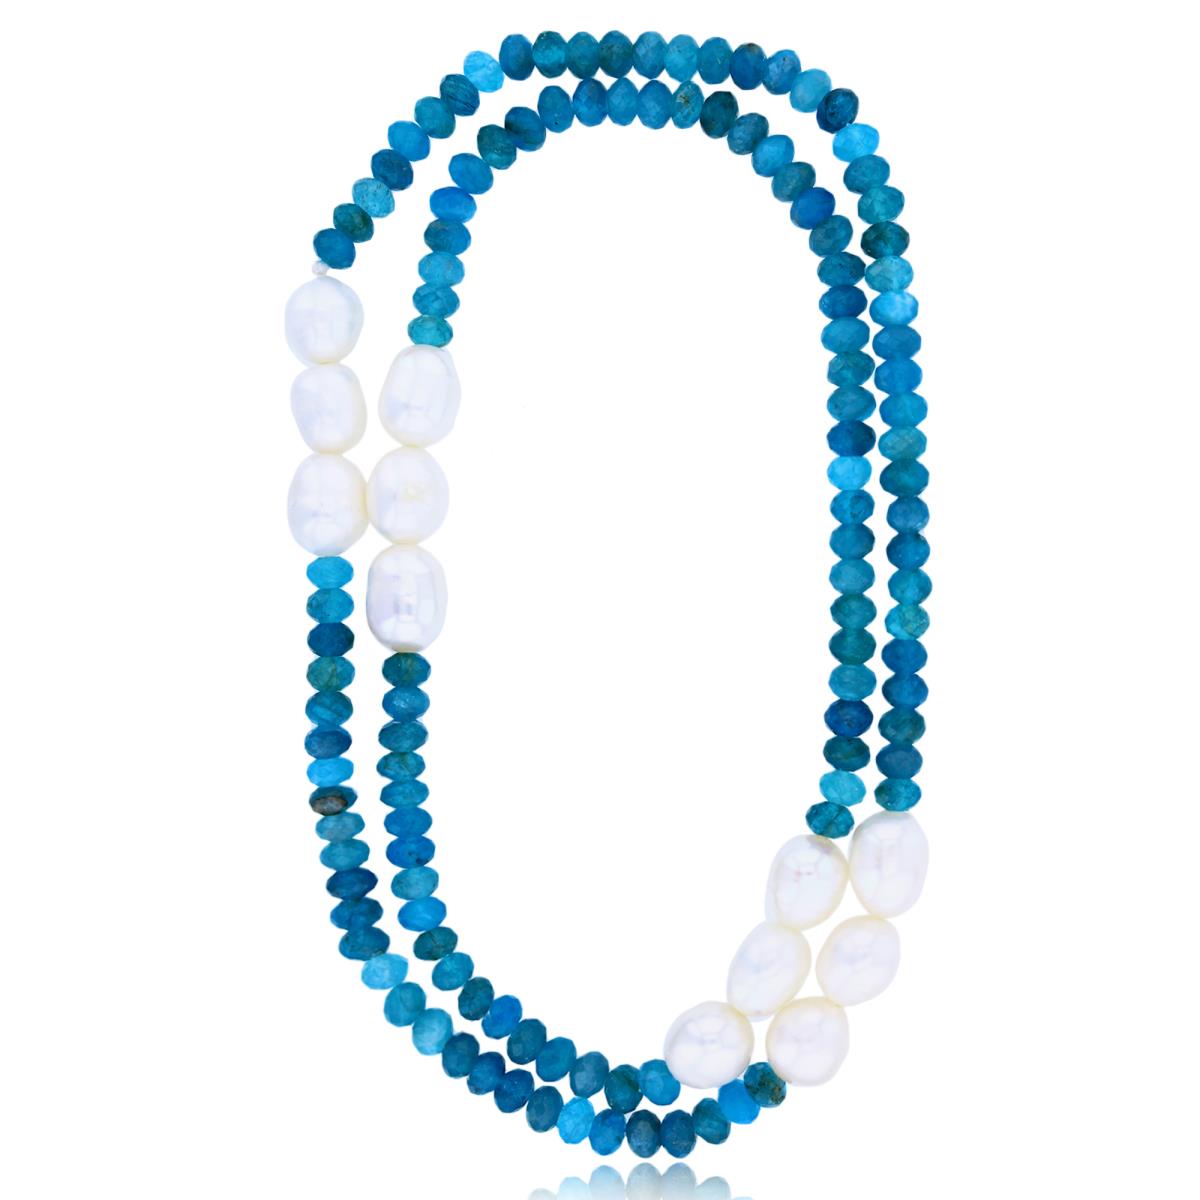 7-8mm Oval FWP & 4x5mm Apatite 36" Necklace